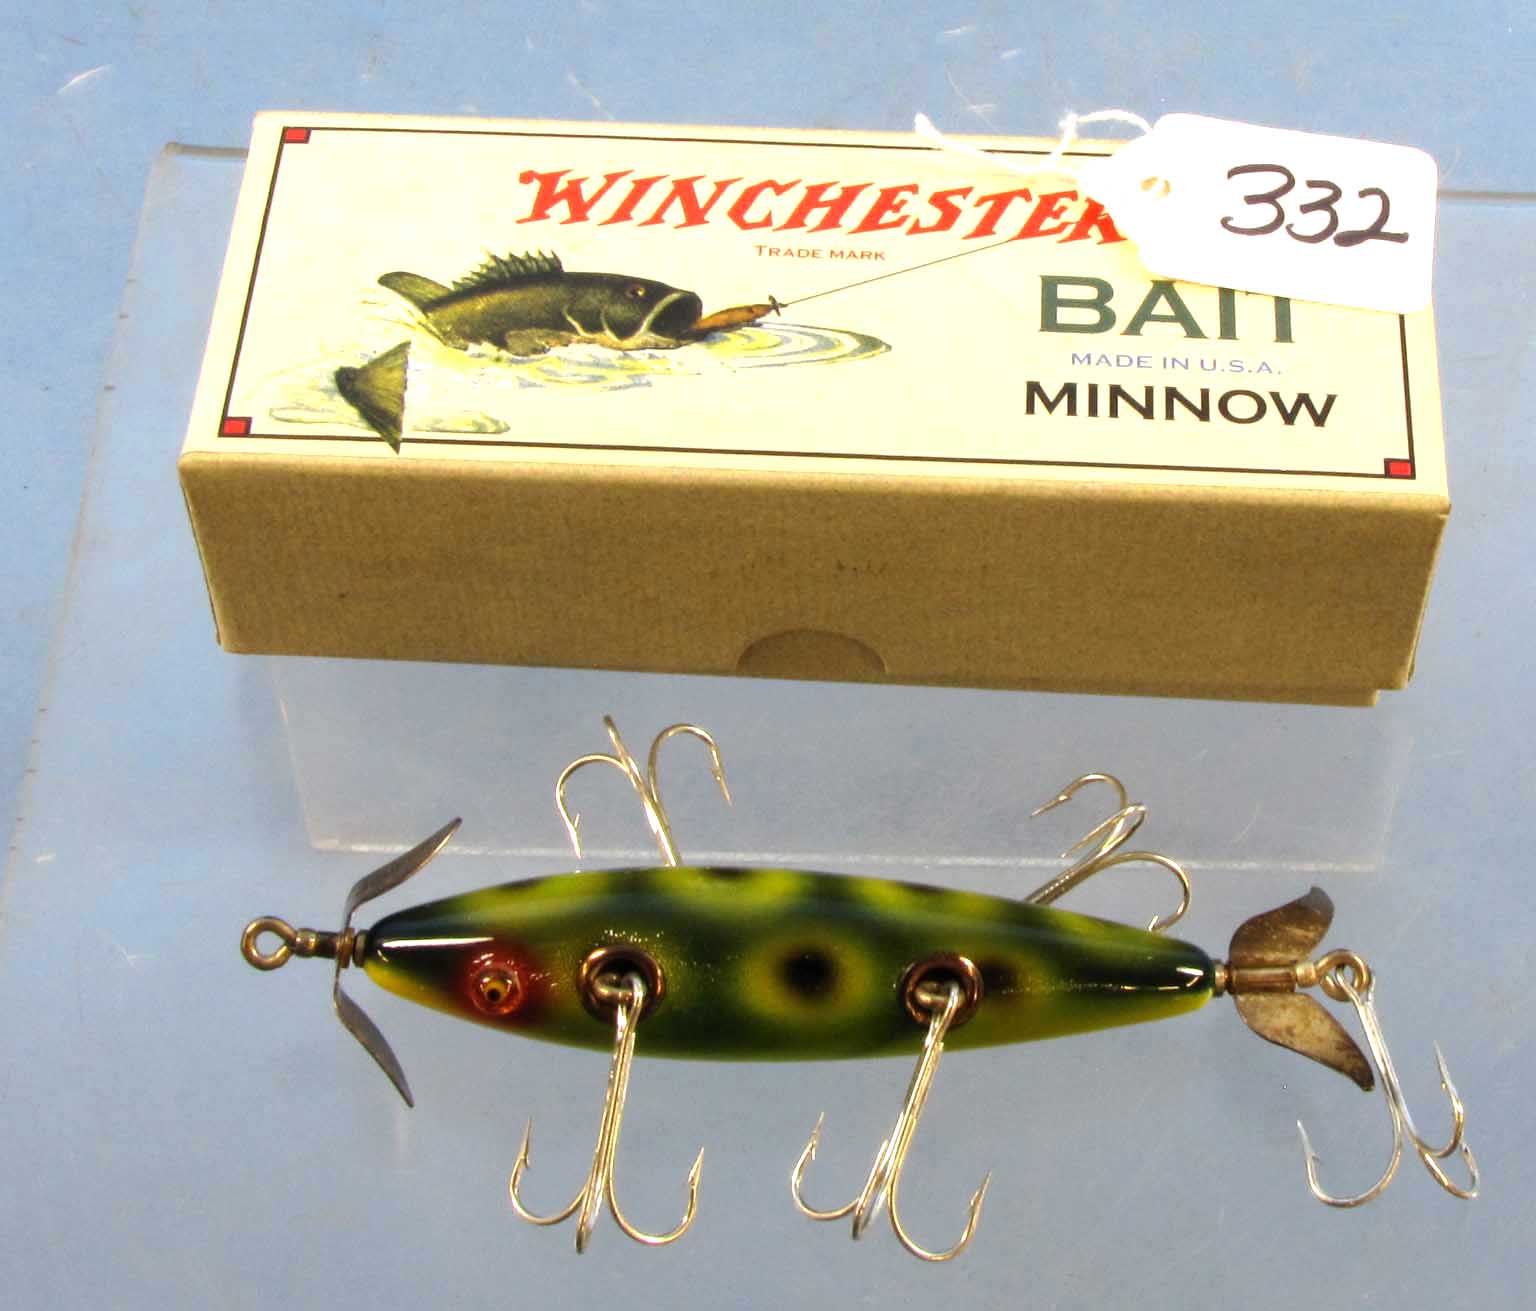 2001 Limited Series Winchester 5 Hook Minnow;